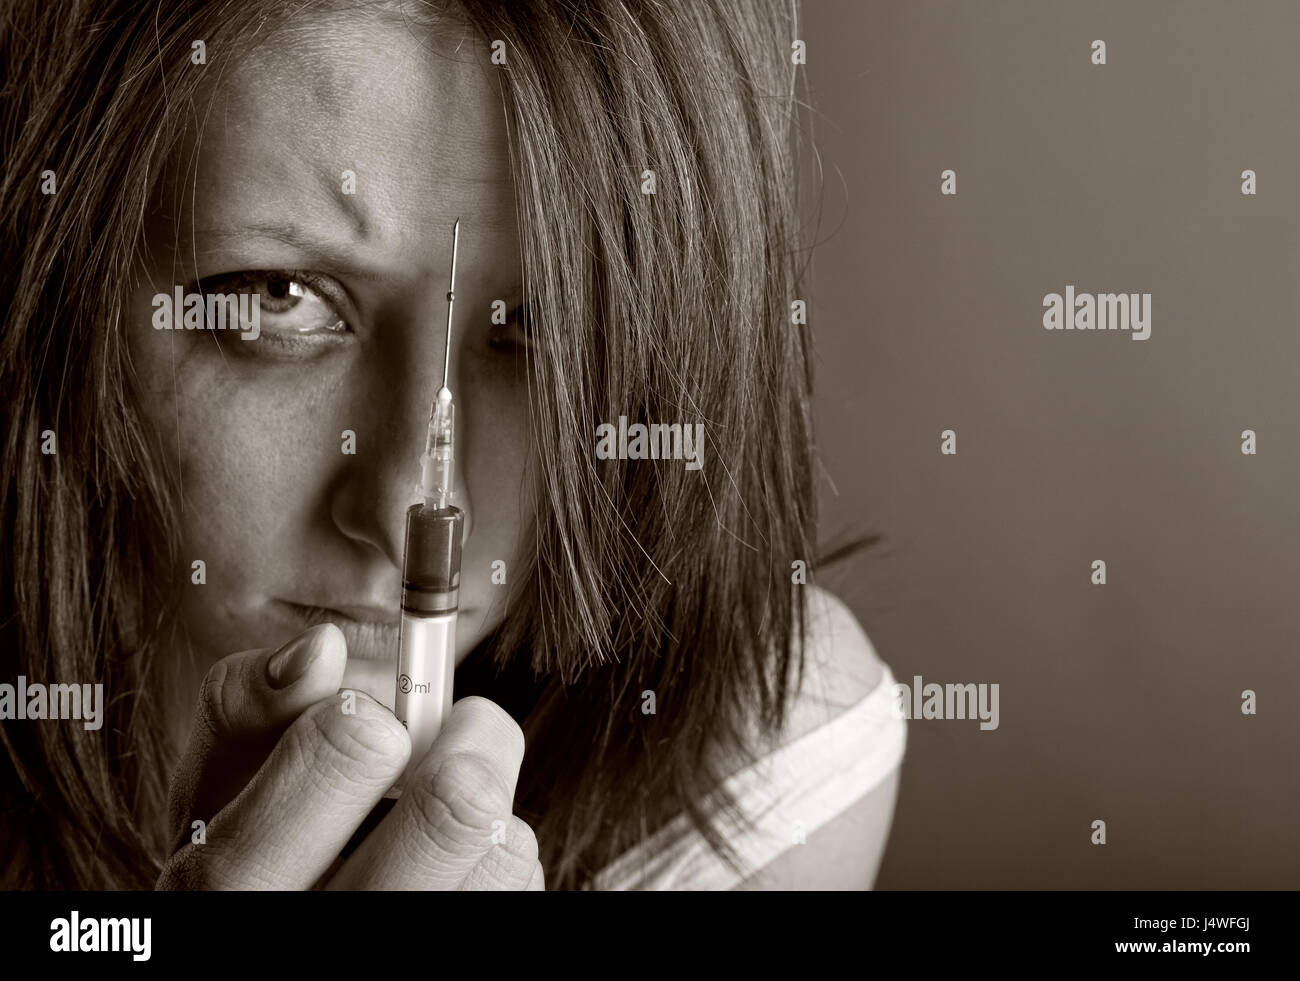 Young woman with drug addiction. Black and white photo Stock Photo